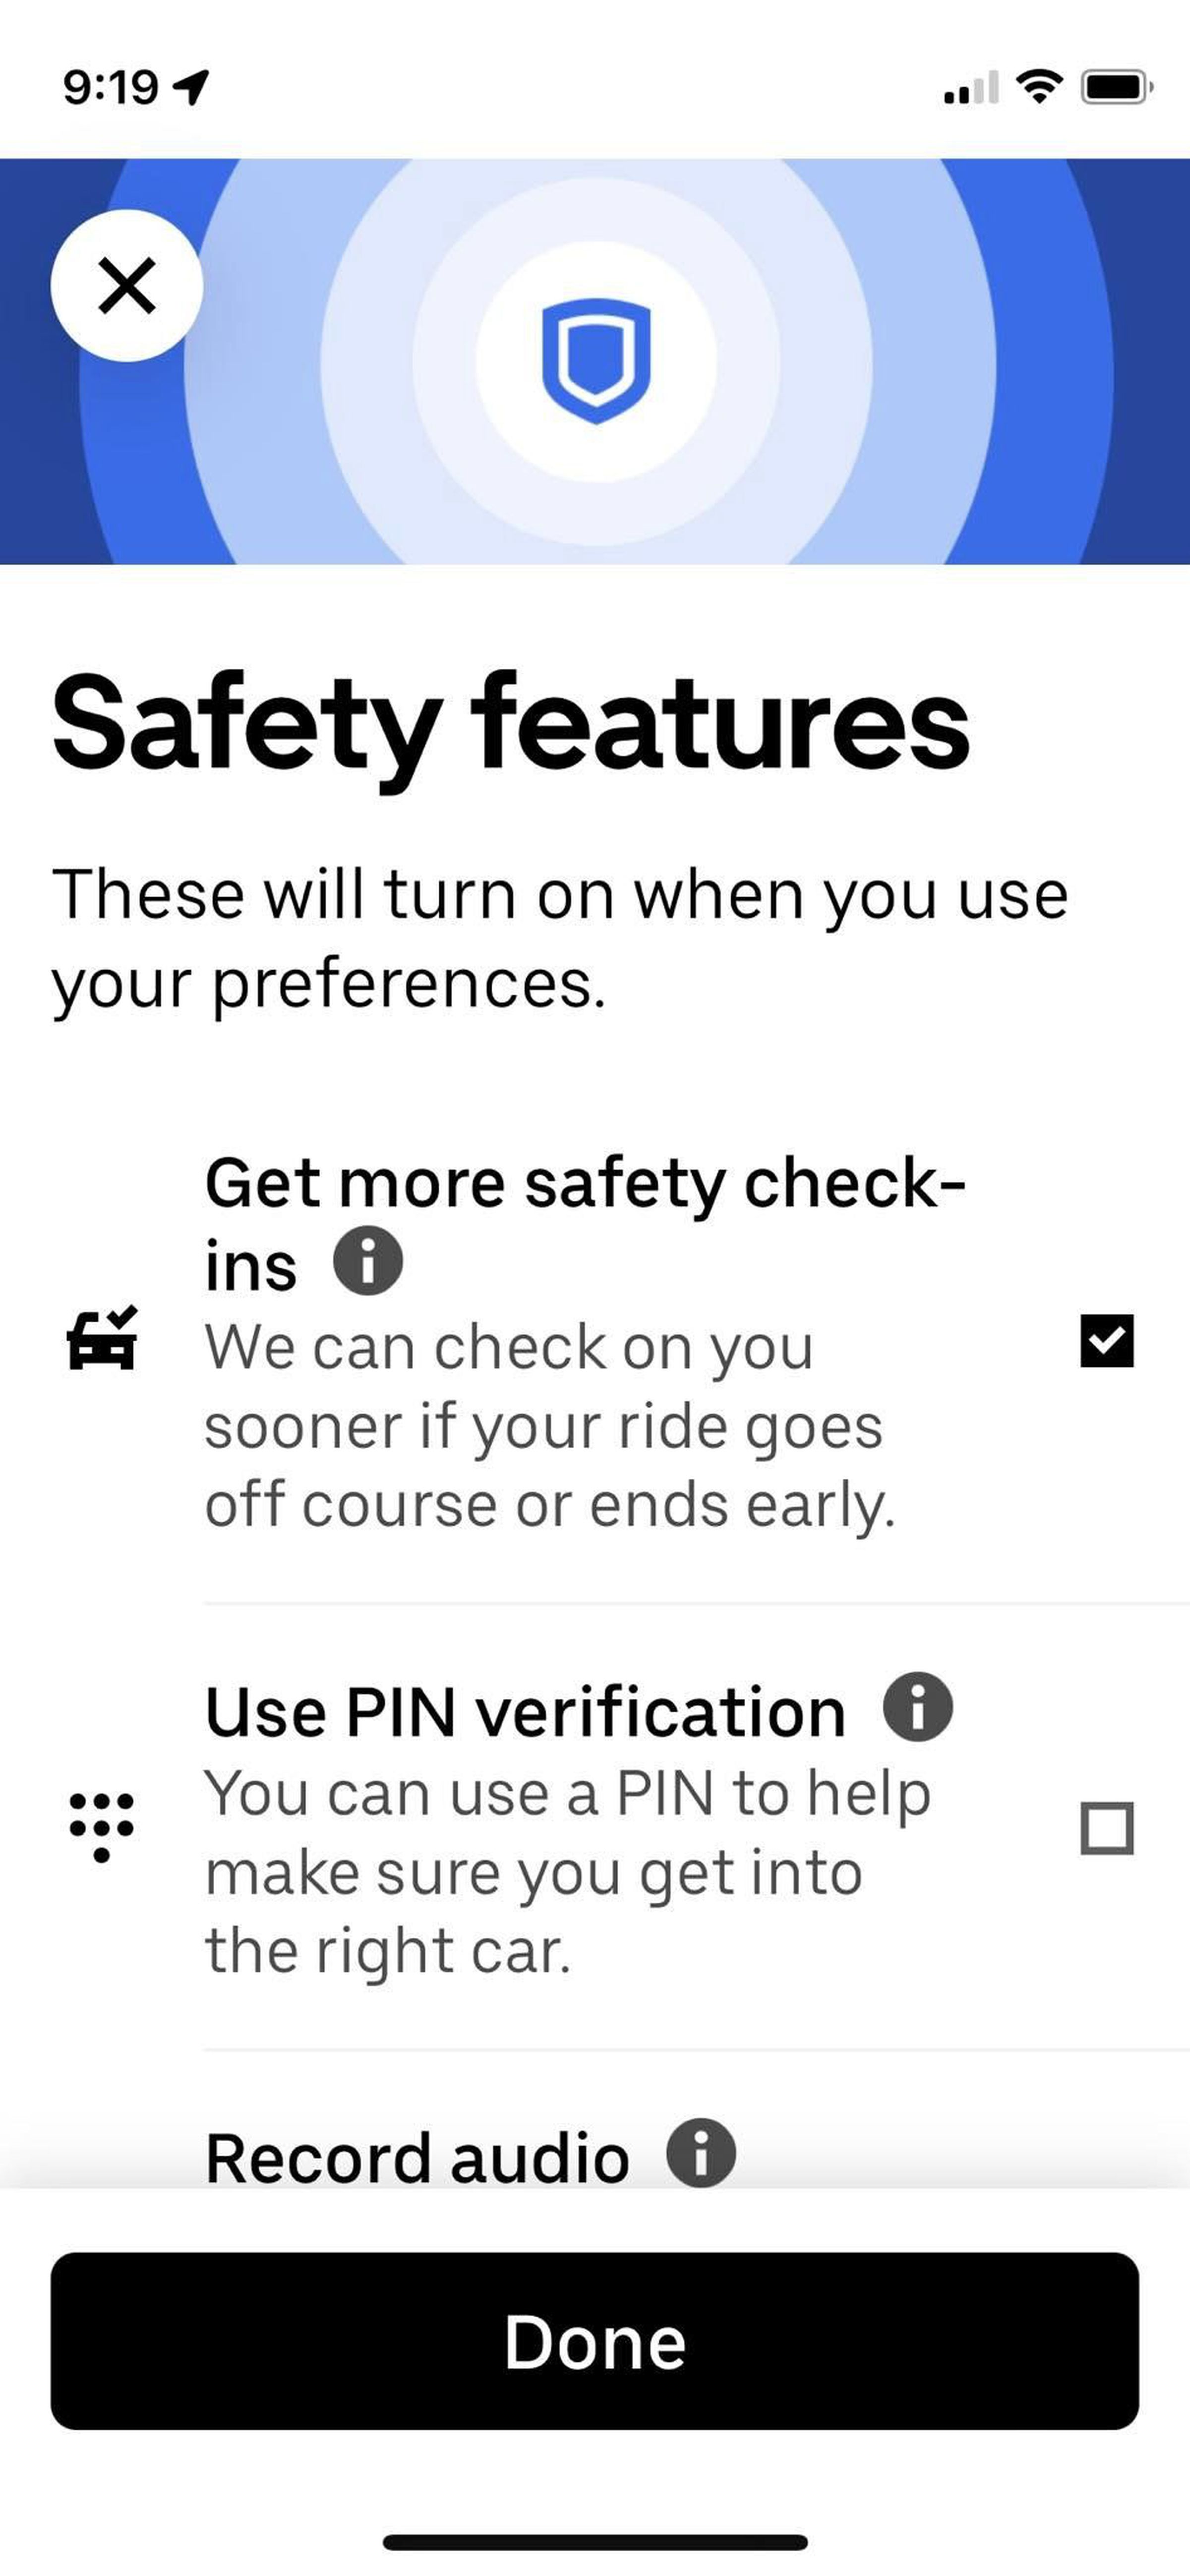 Choose which of the four safety features you’d like to active, which include: <strong>Get more safety check-ins</strong>; <strong>Use PIN verification</strong>; <strong>Record audio</strong>; and<strong> Share trip status.</strong> 